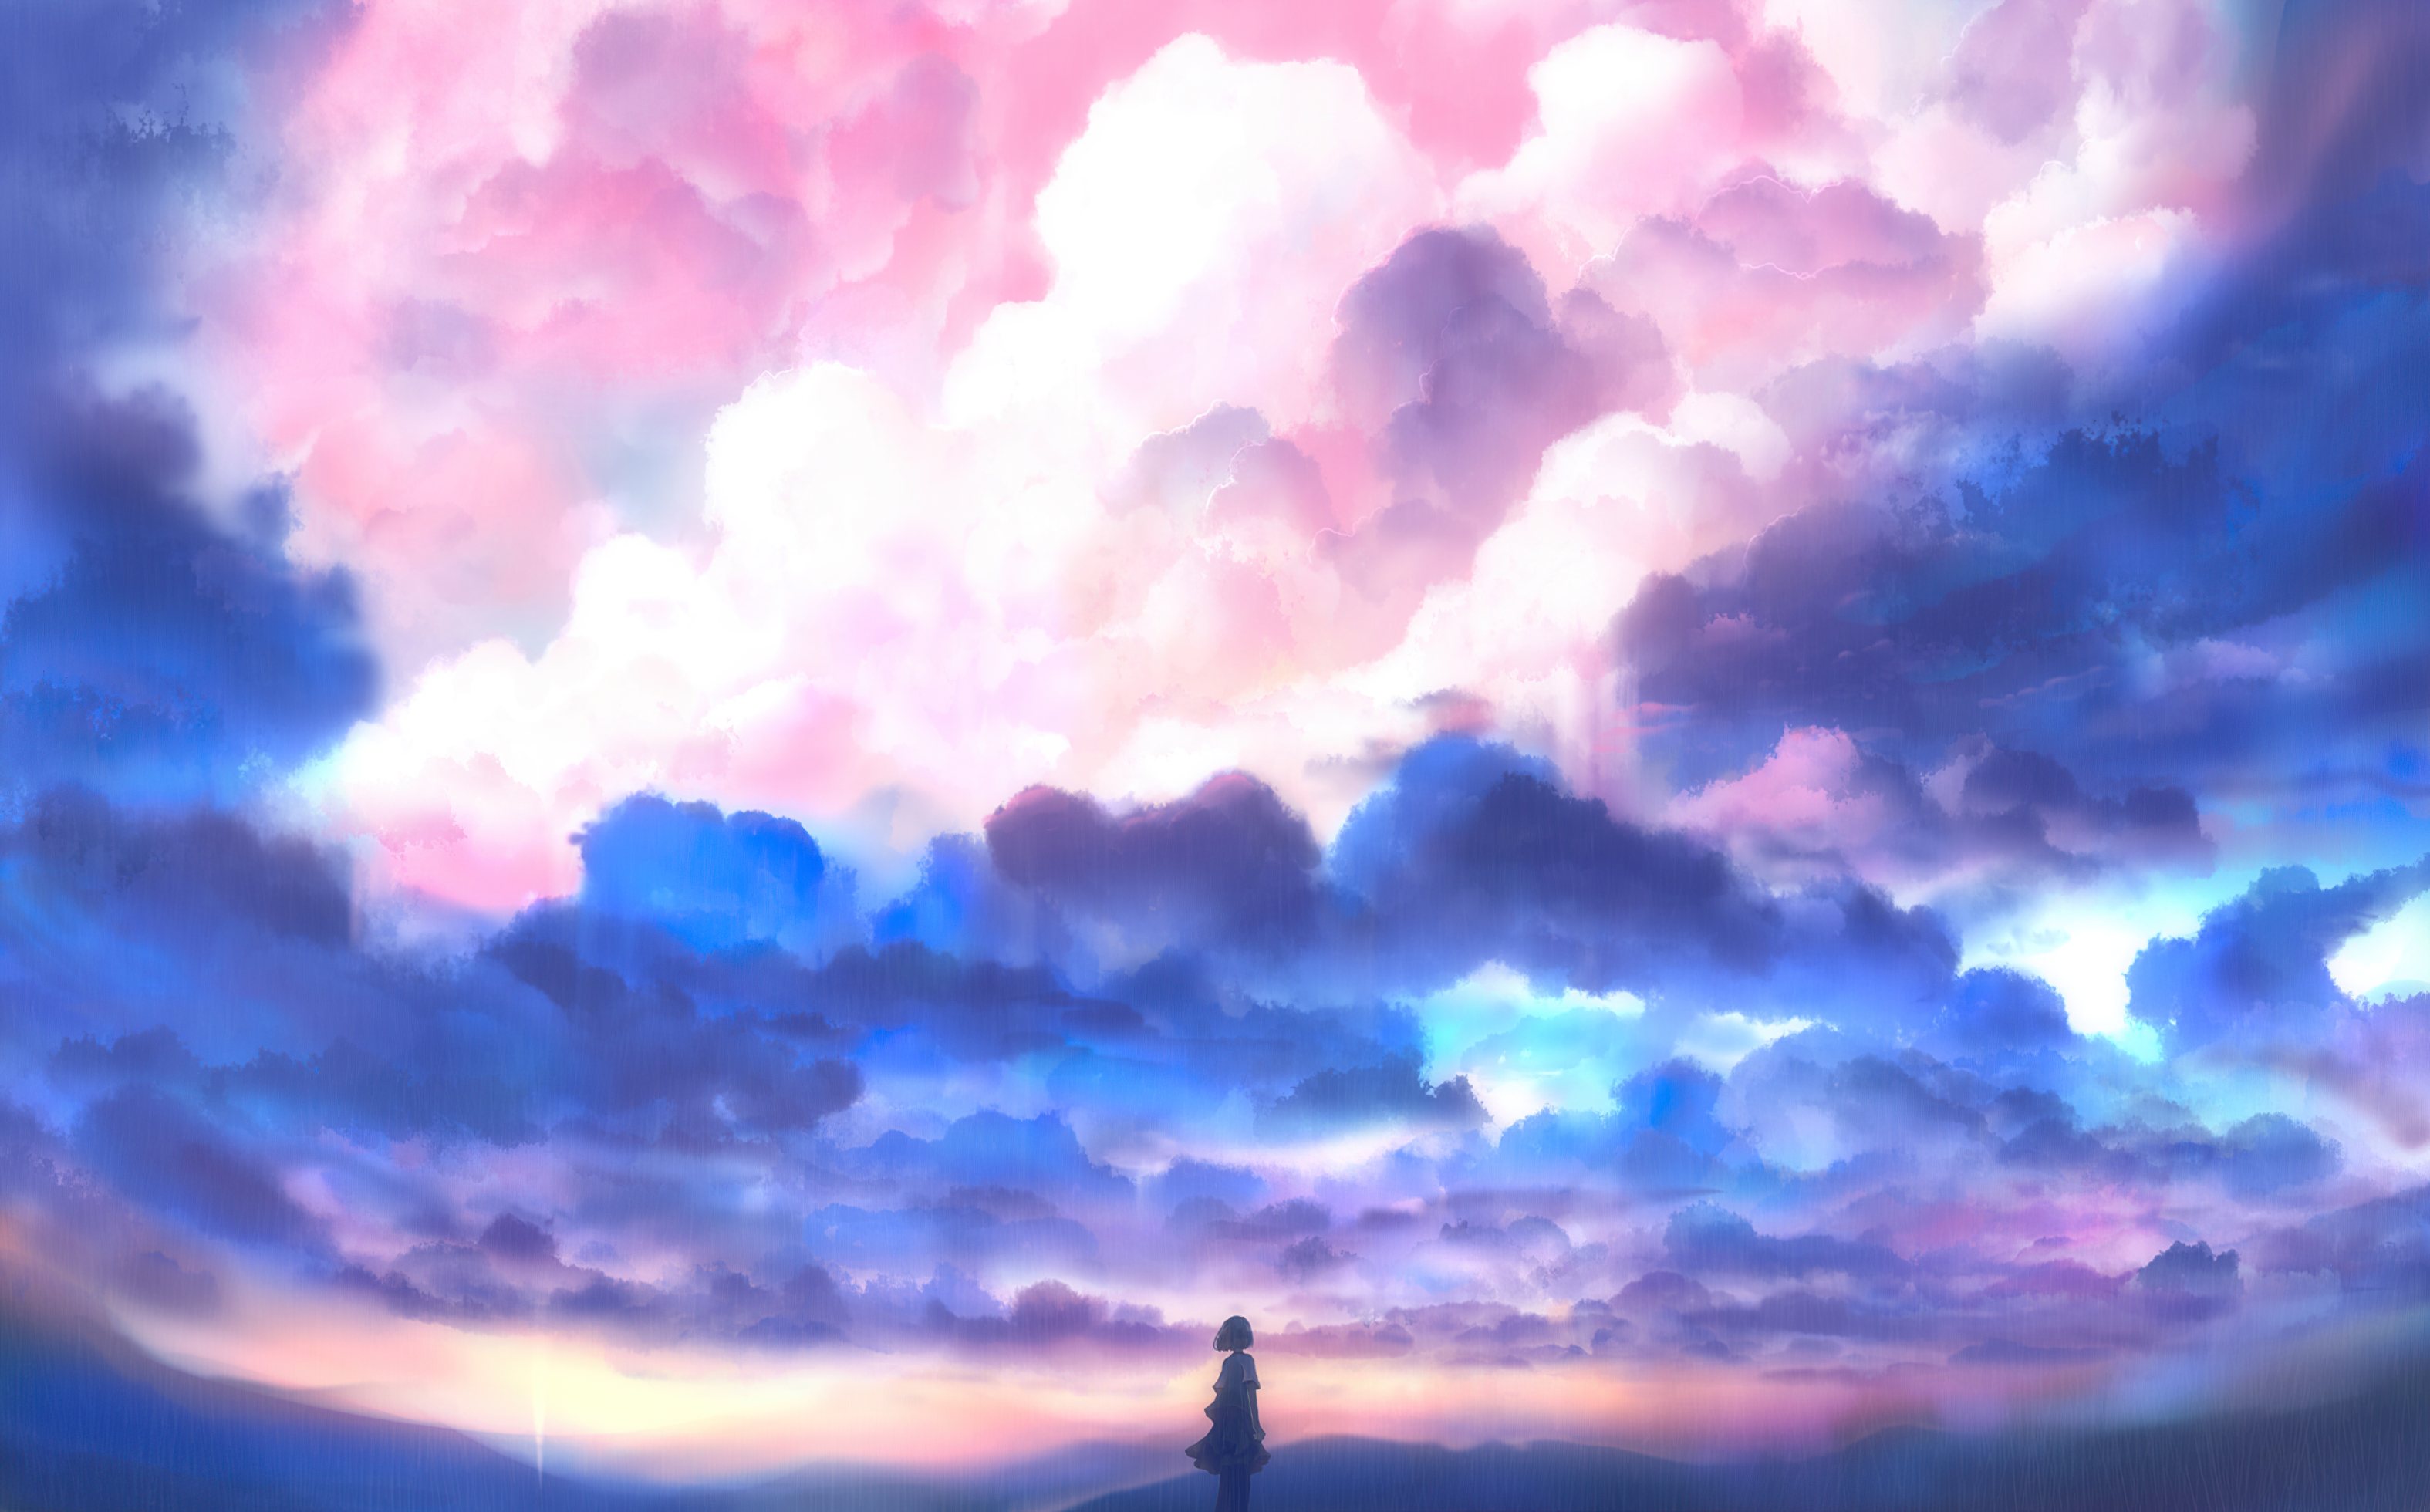 14,994 Sky Anime Images, Stock Photos, 3D objects, & Vectors | Shutterstock